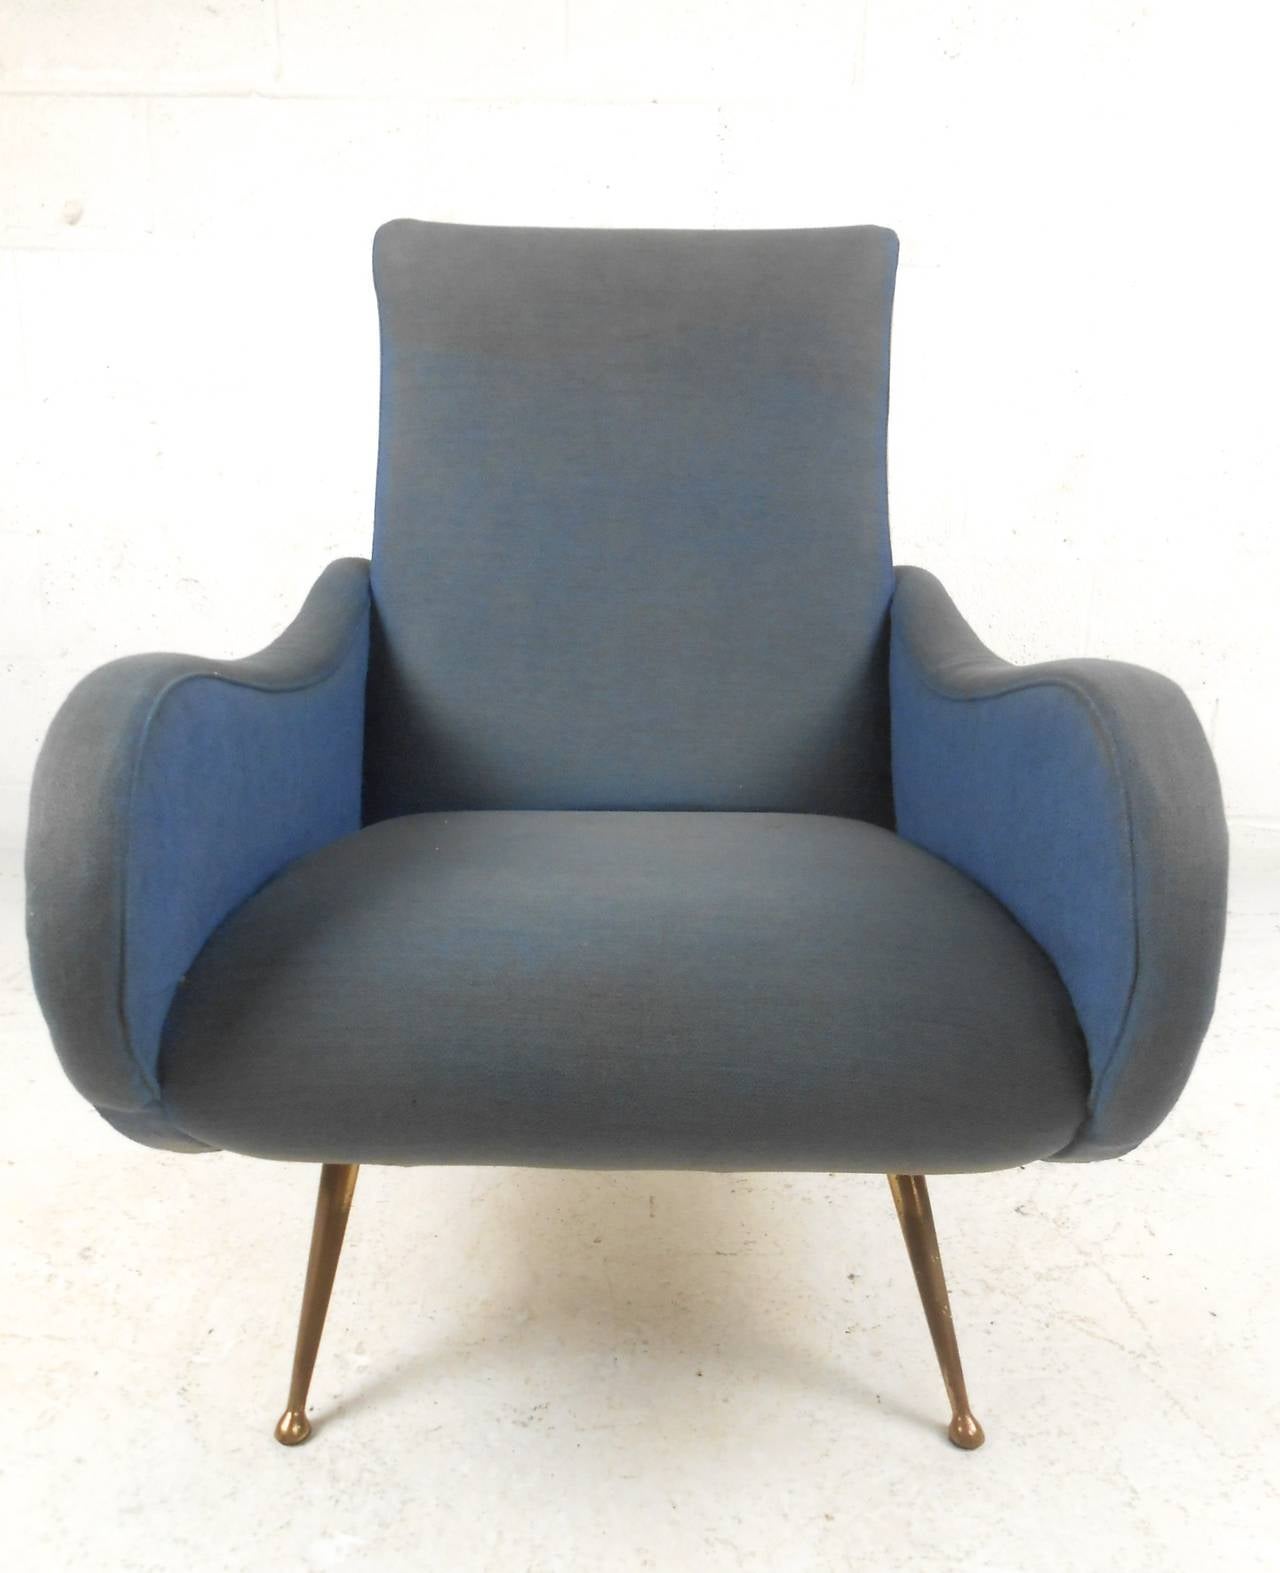 Pair of Mid-Century Modern Italian Chairs in the Style of Marco Zanuso 1